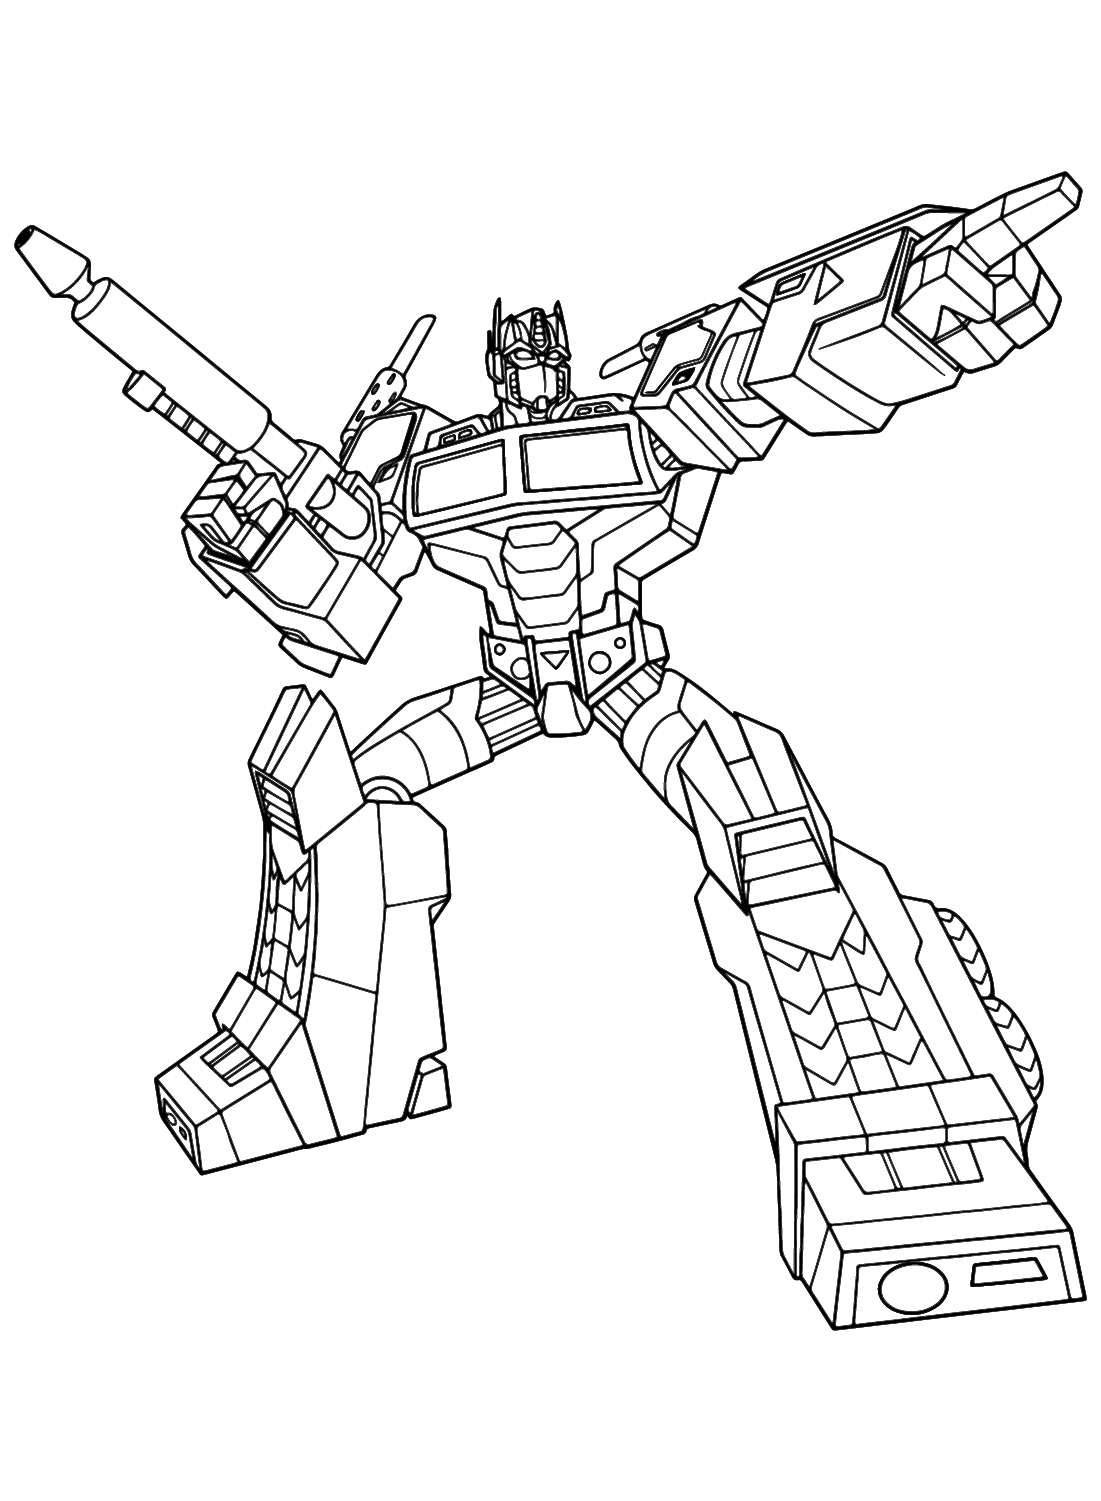 Official Takara Tomy Transformers Cyberverse Coloring Pages from Transformers